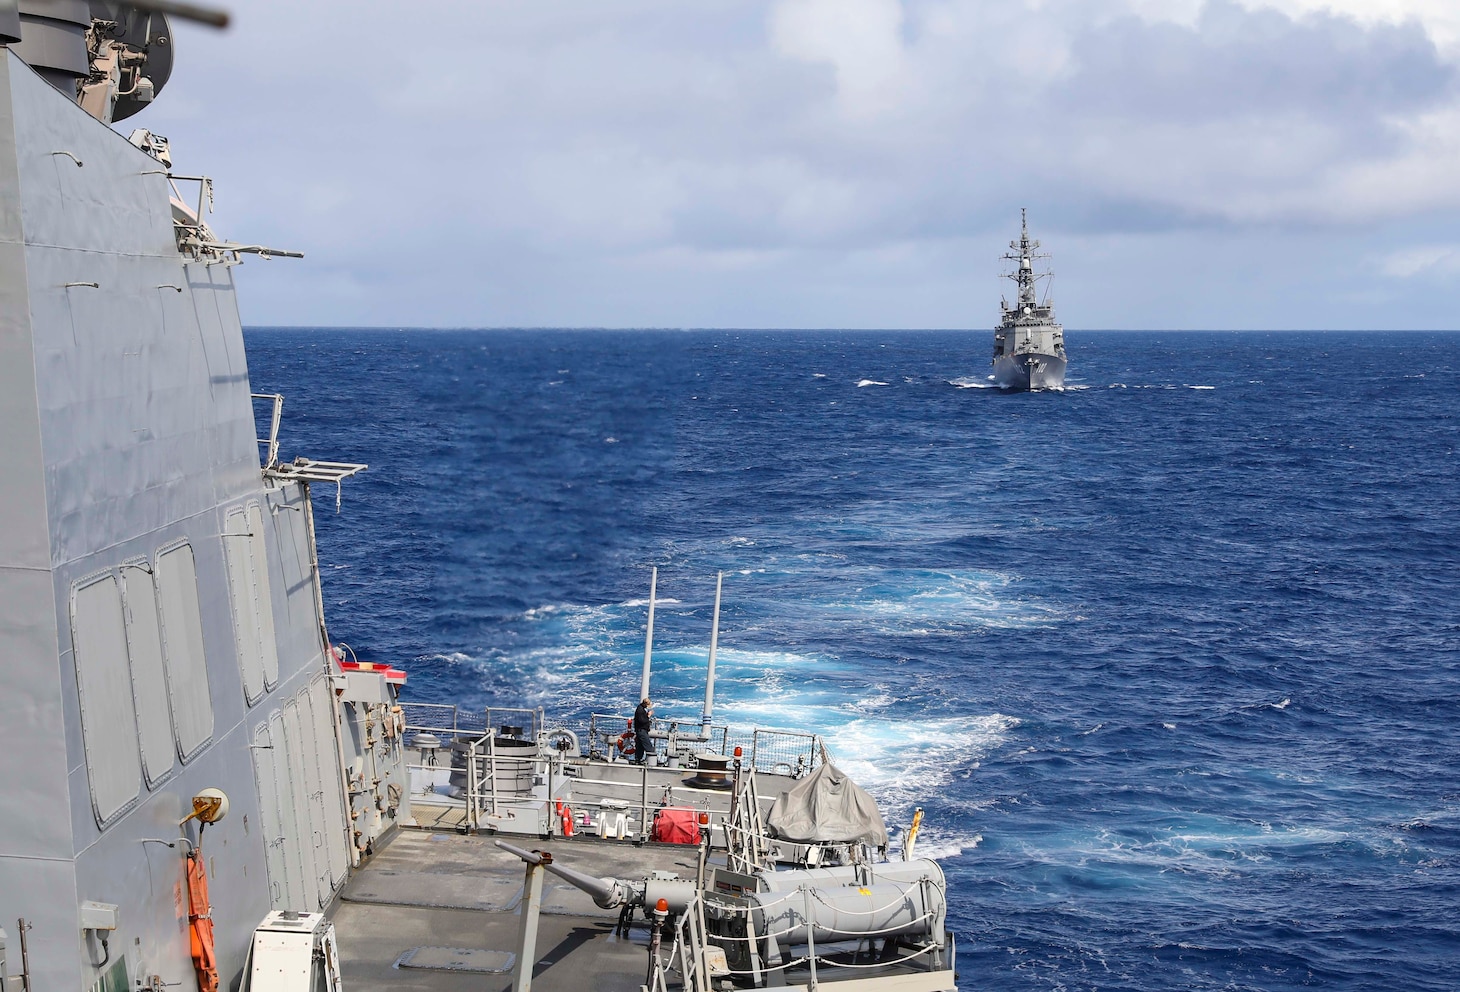 210303-N-FO714-1015 PHILIPPINE SEA (March 3, 2021) - The Arleigh Burke-class guided-missile destroyer USS Benfold (DDG 65) sails in formation with the Japan Maritime Self-Defense Force missile destroyer JS Harusame (DD 102) during the annual U.S.-Japan Bilateral Advanced Warfighting Training Exercise. BAWT focuses on joint training and interoperability of coalition forces, and enables real-world proficiency and readiness in response to any contingency. (U.S. Navy photo by Mass Communication Specialist 2nd Class Deanna C. Gonzales)